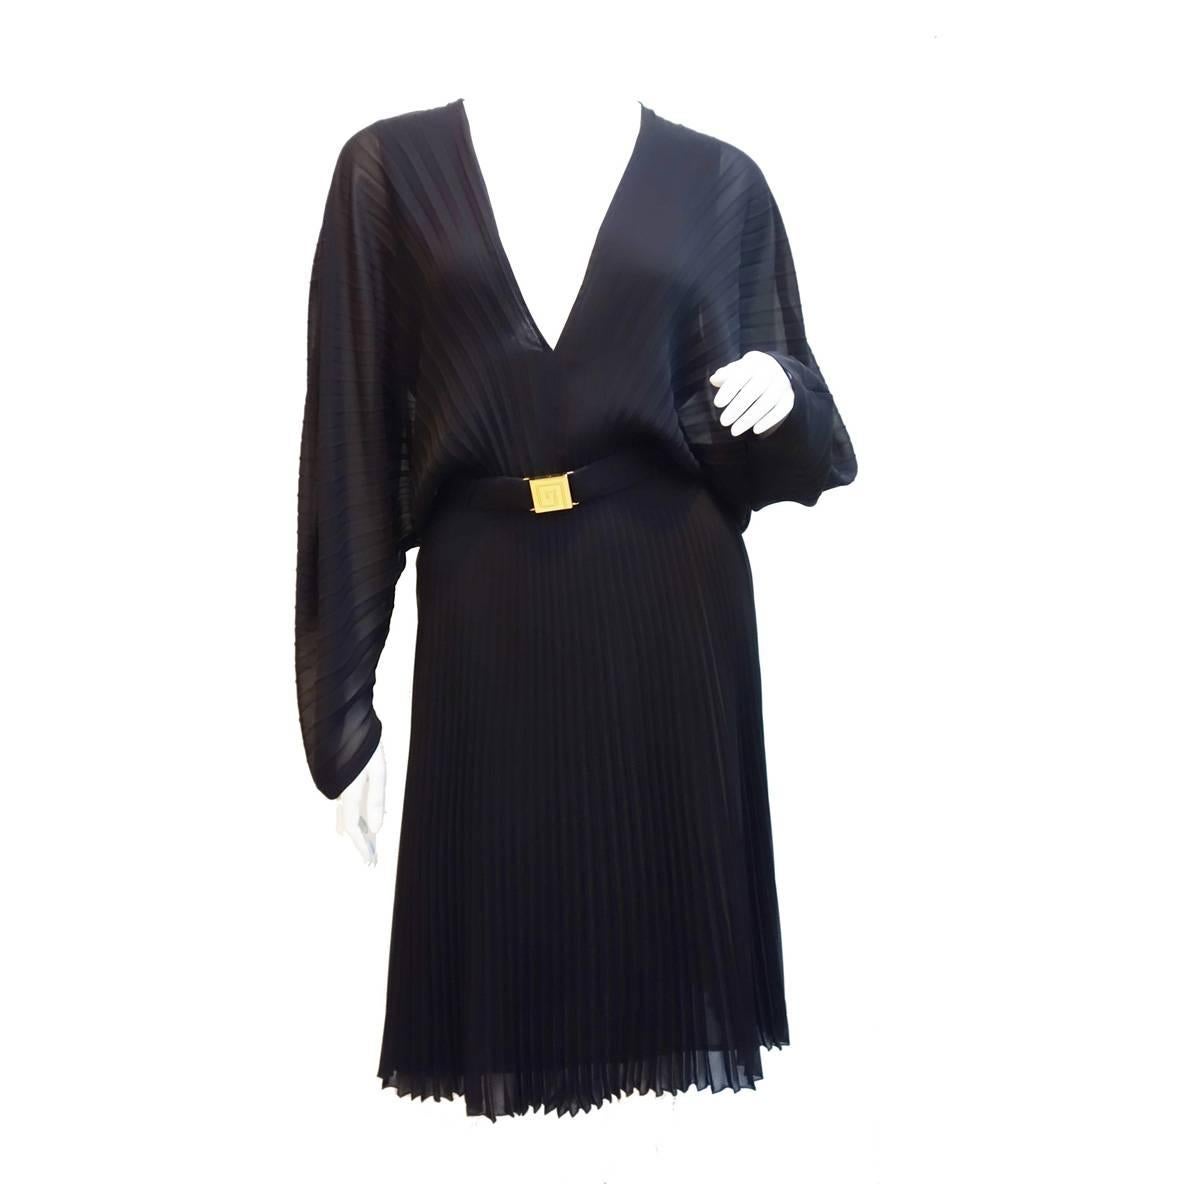 Gianni Versace Couture Black Pleated, Belted Chiffon Dress 1990s